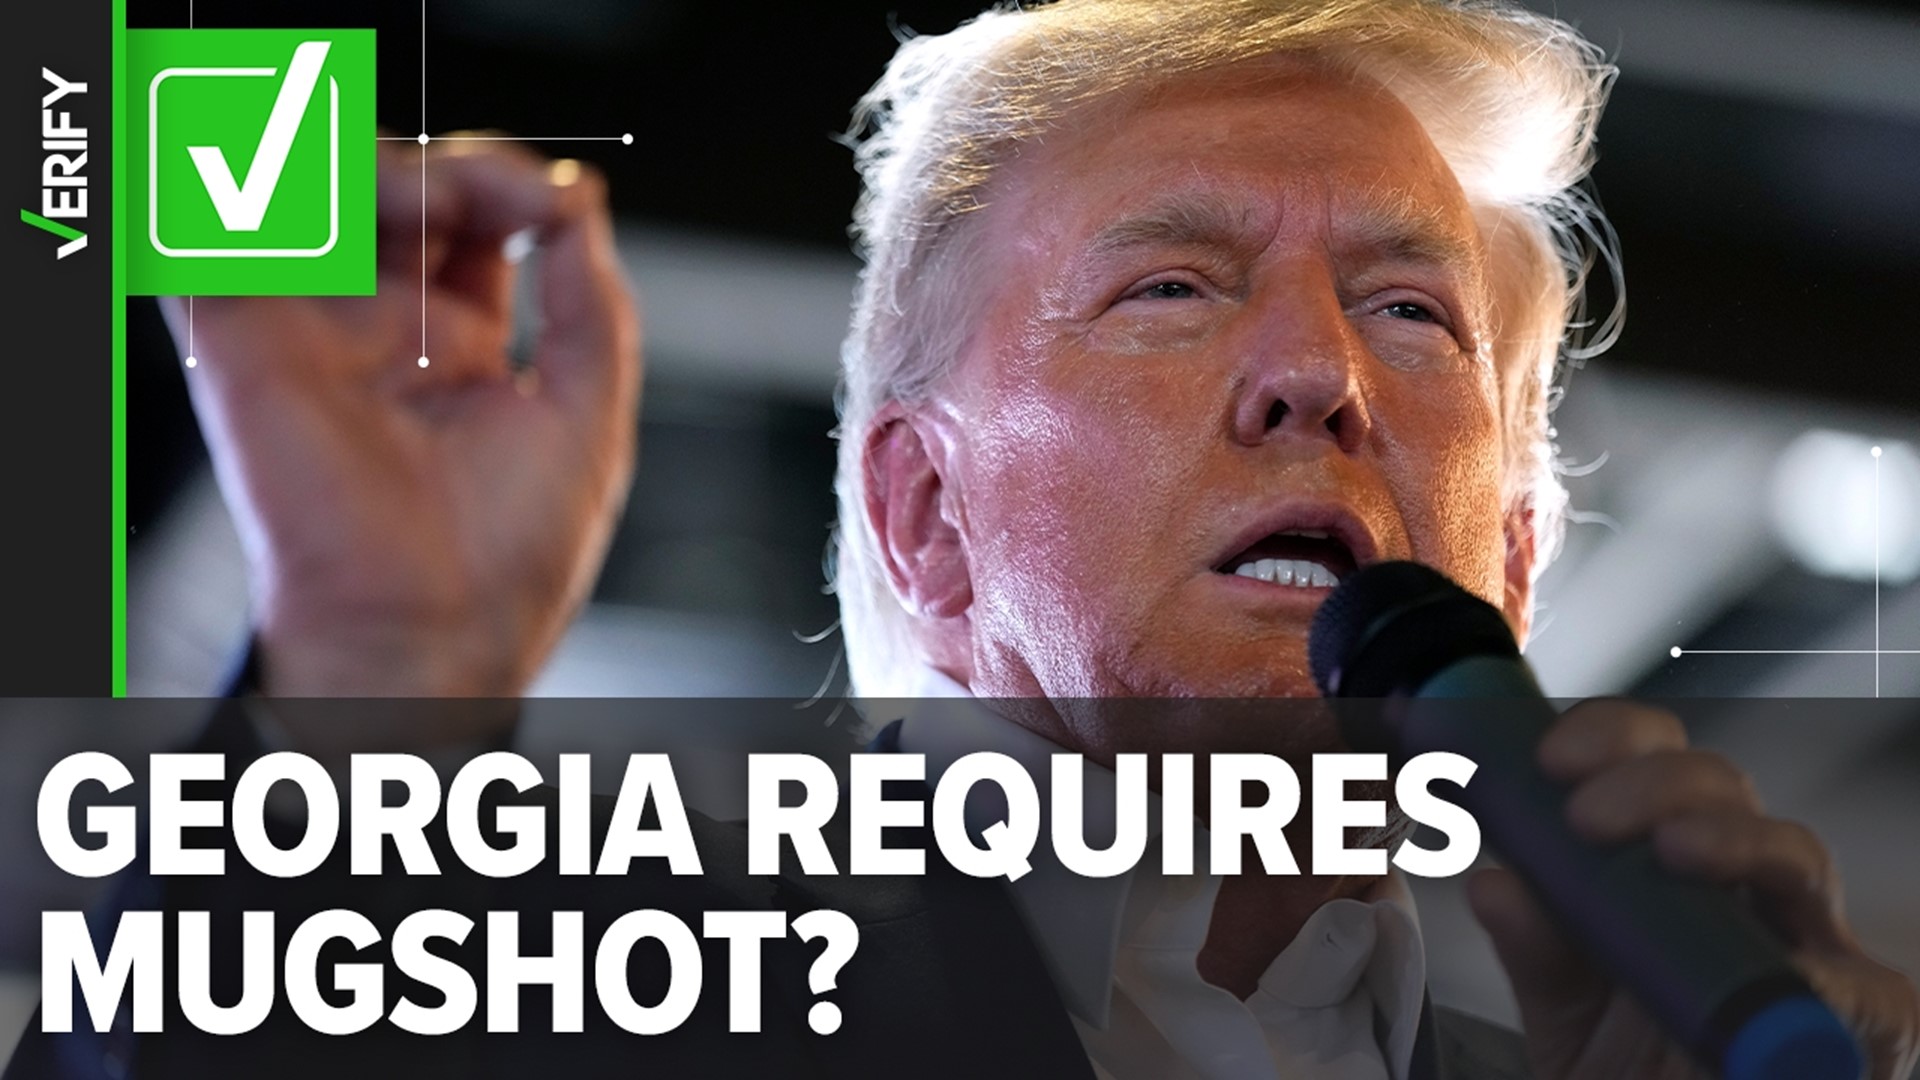 Fulton County Sheriff Pat Labat said his department plans on following “normal practices,” including taking mugshots, when former President Trump is formally booked.